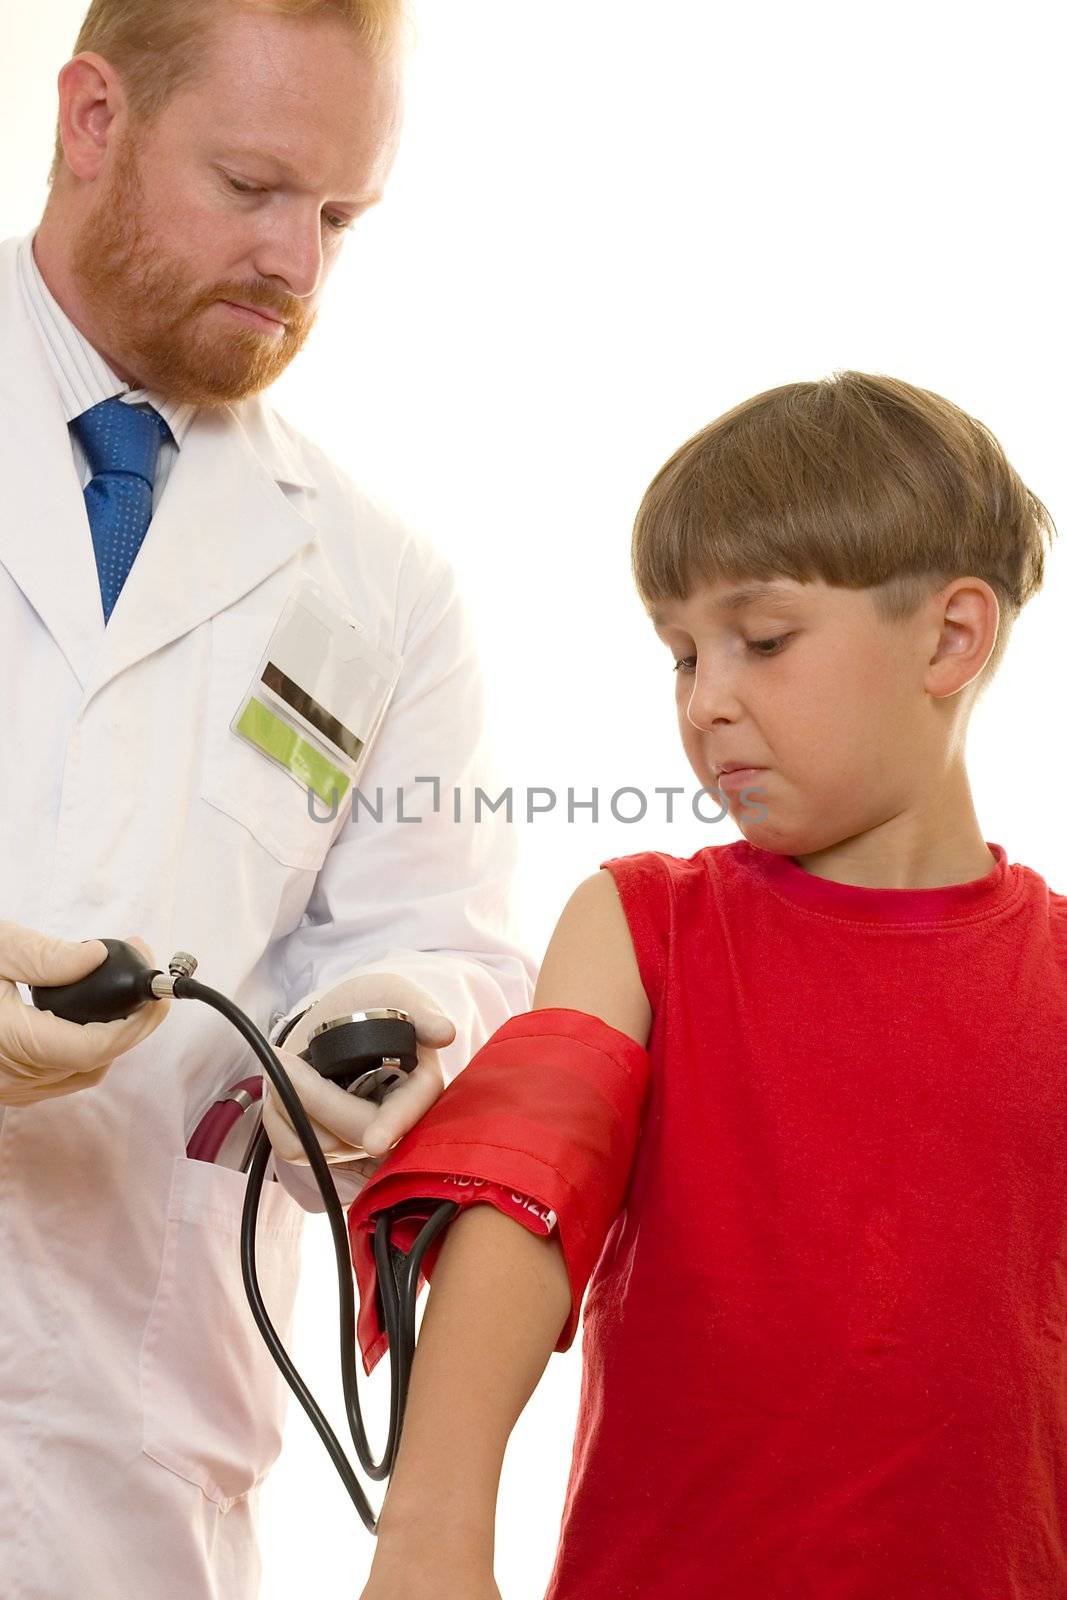 Doctor taking a young patient's blood pressure